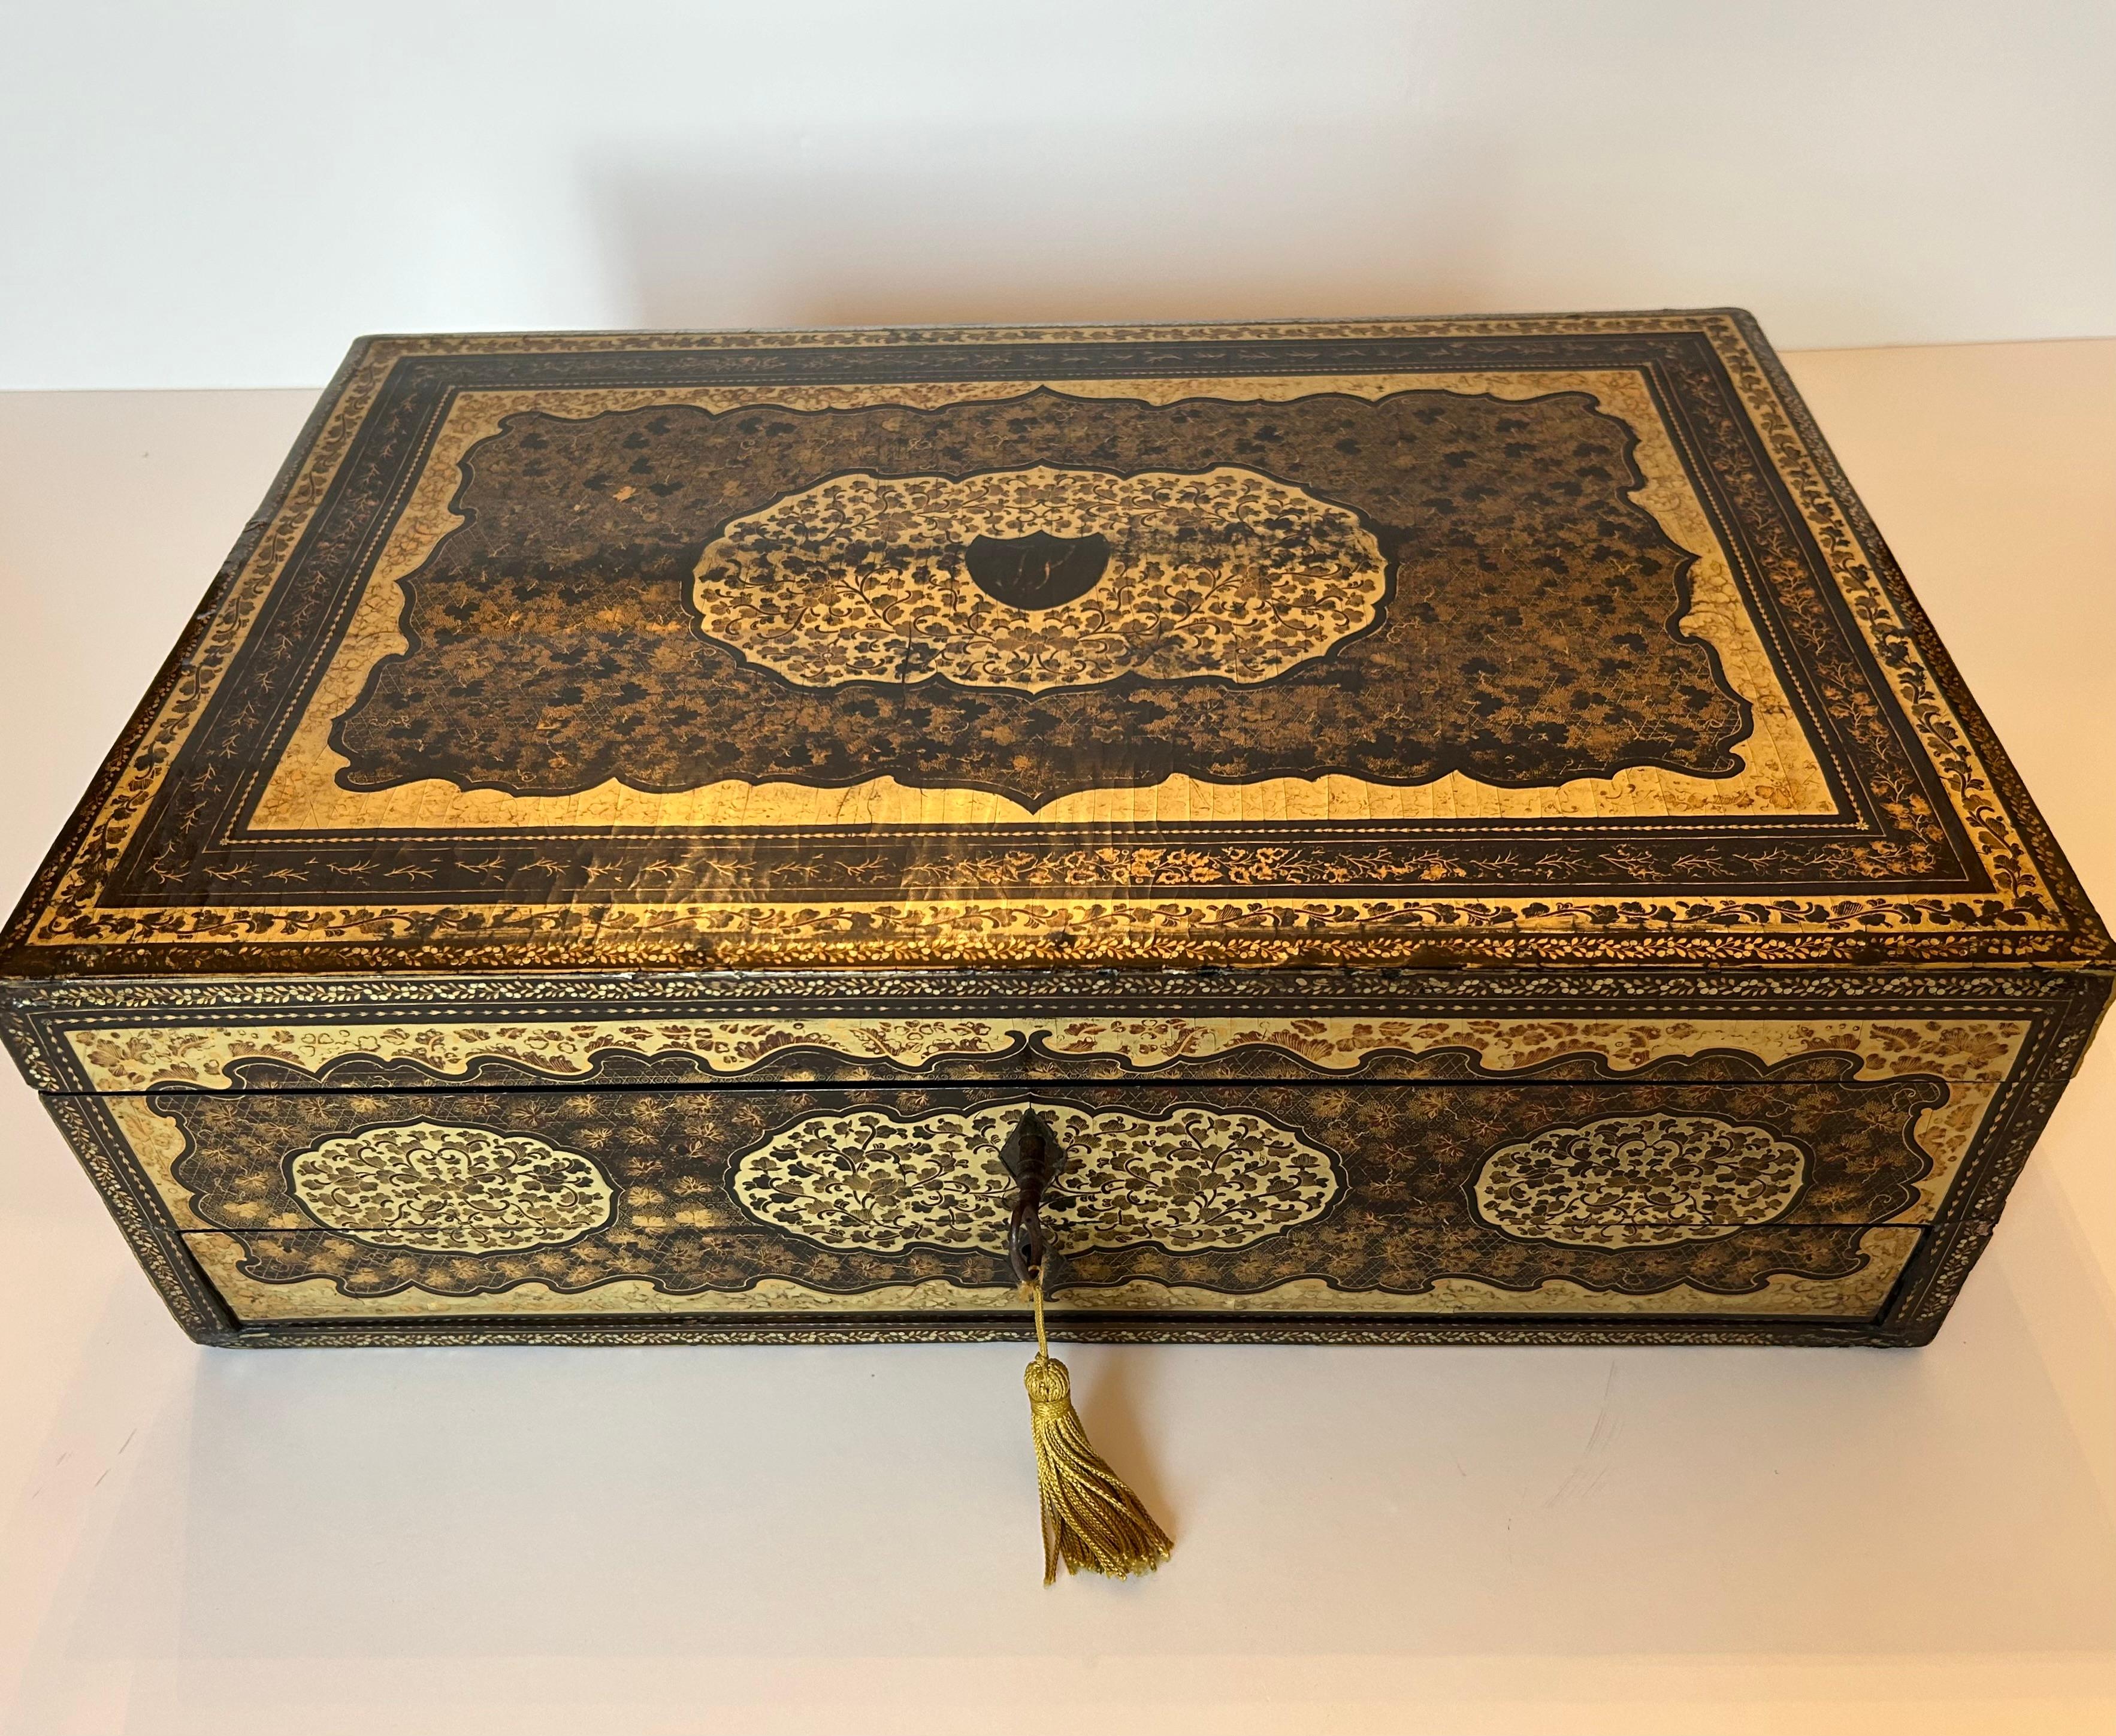 This is a remarkable 19th century lacquered sewing box with multiple compartments on the interior.
The exterior is decorated in elaborate black and gilded motifs including flowers, foliage and grapes. The top portion of the interior is fitted with